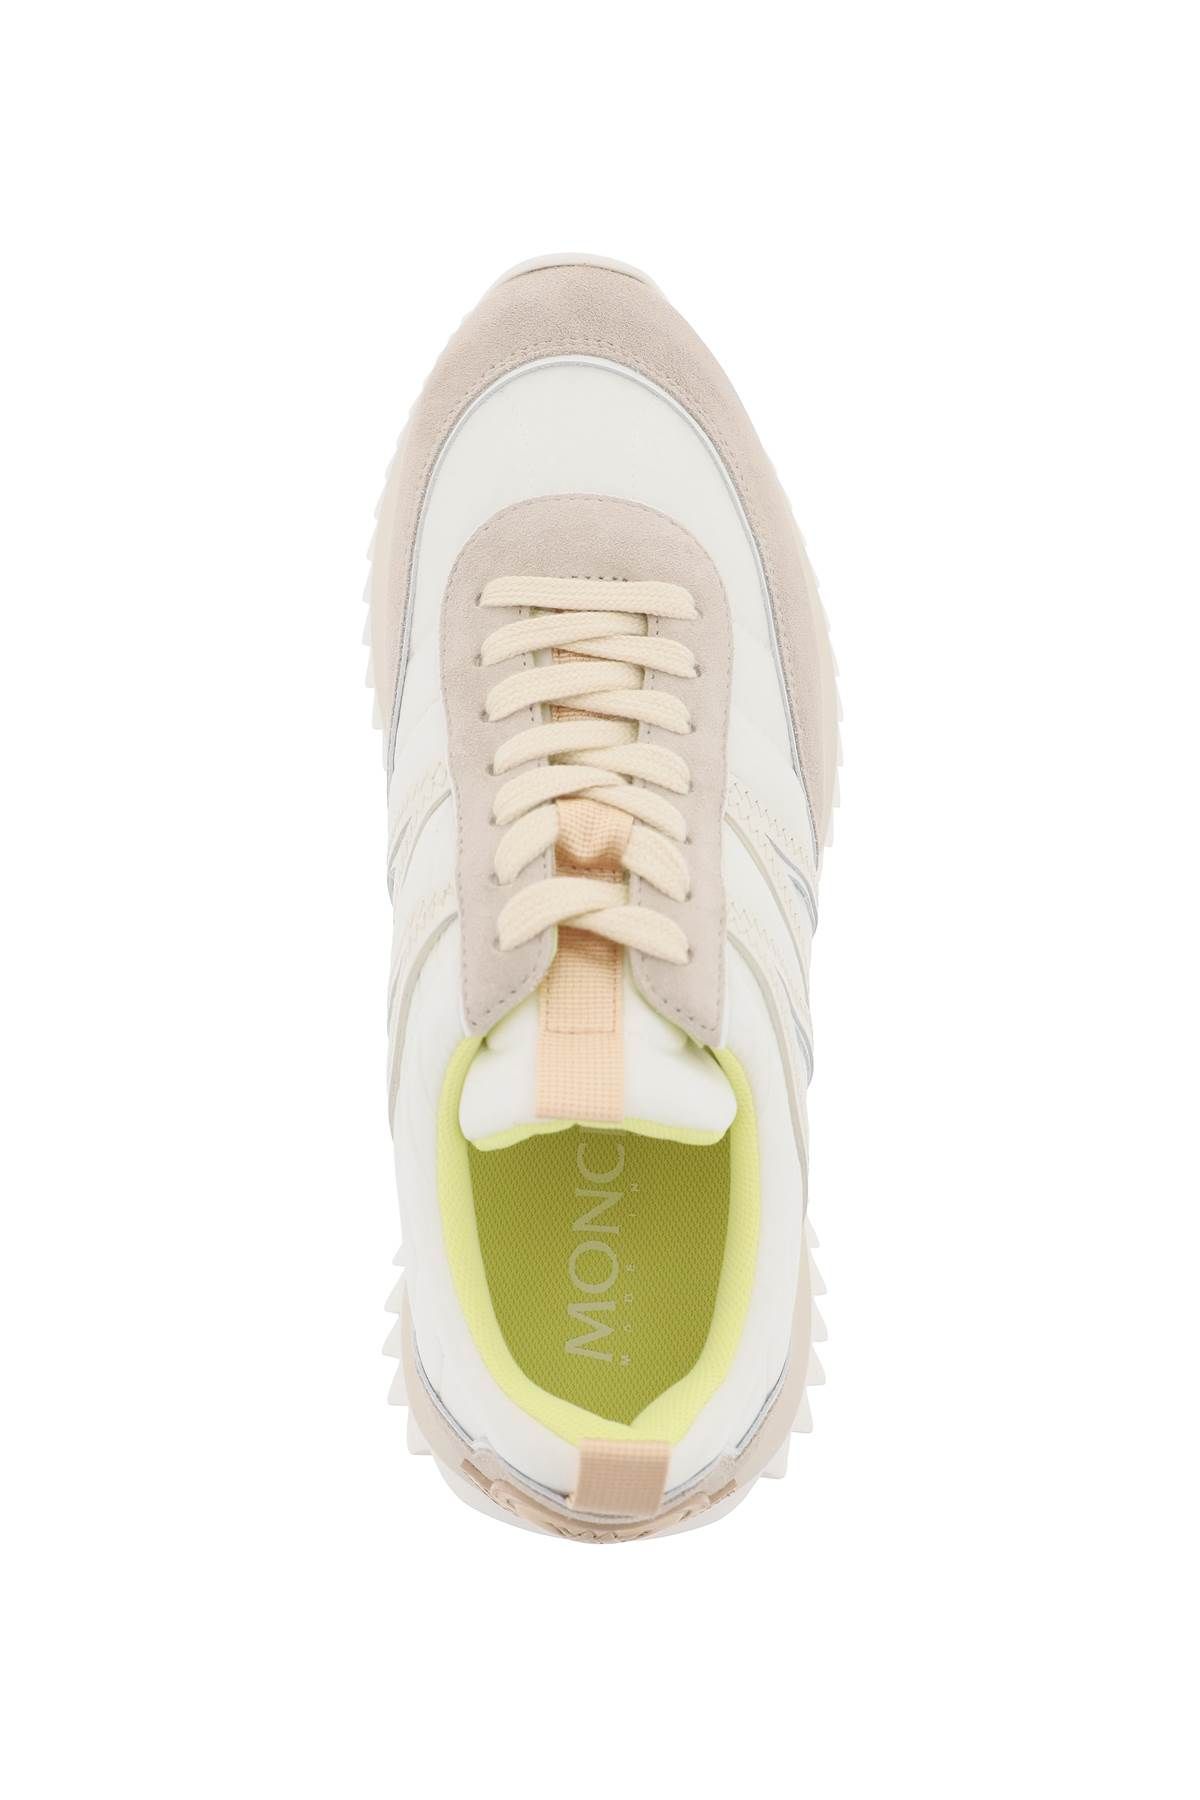 Shop Moncler Pacey Sneakers In Nylon And Suede Leather. In White,grey